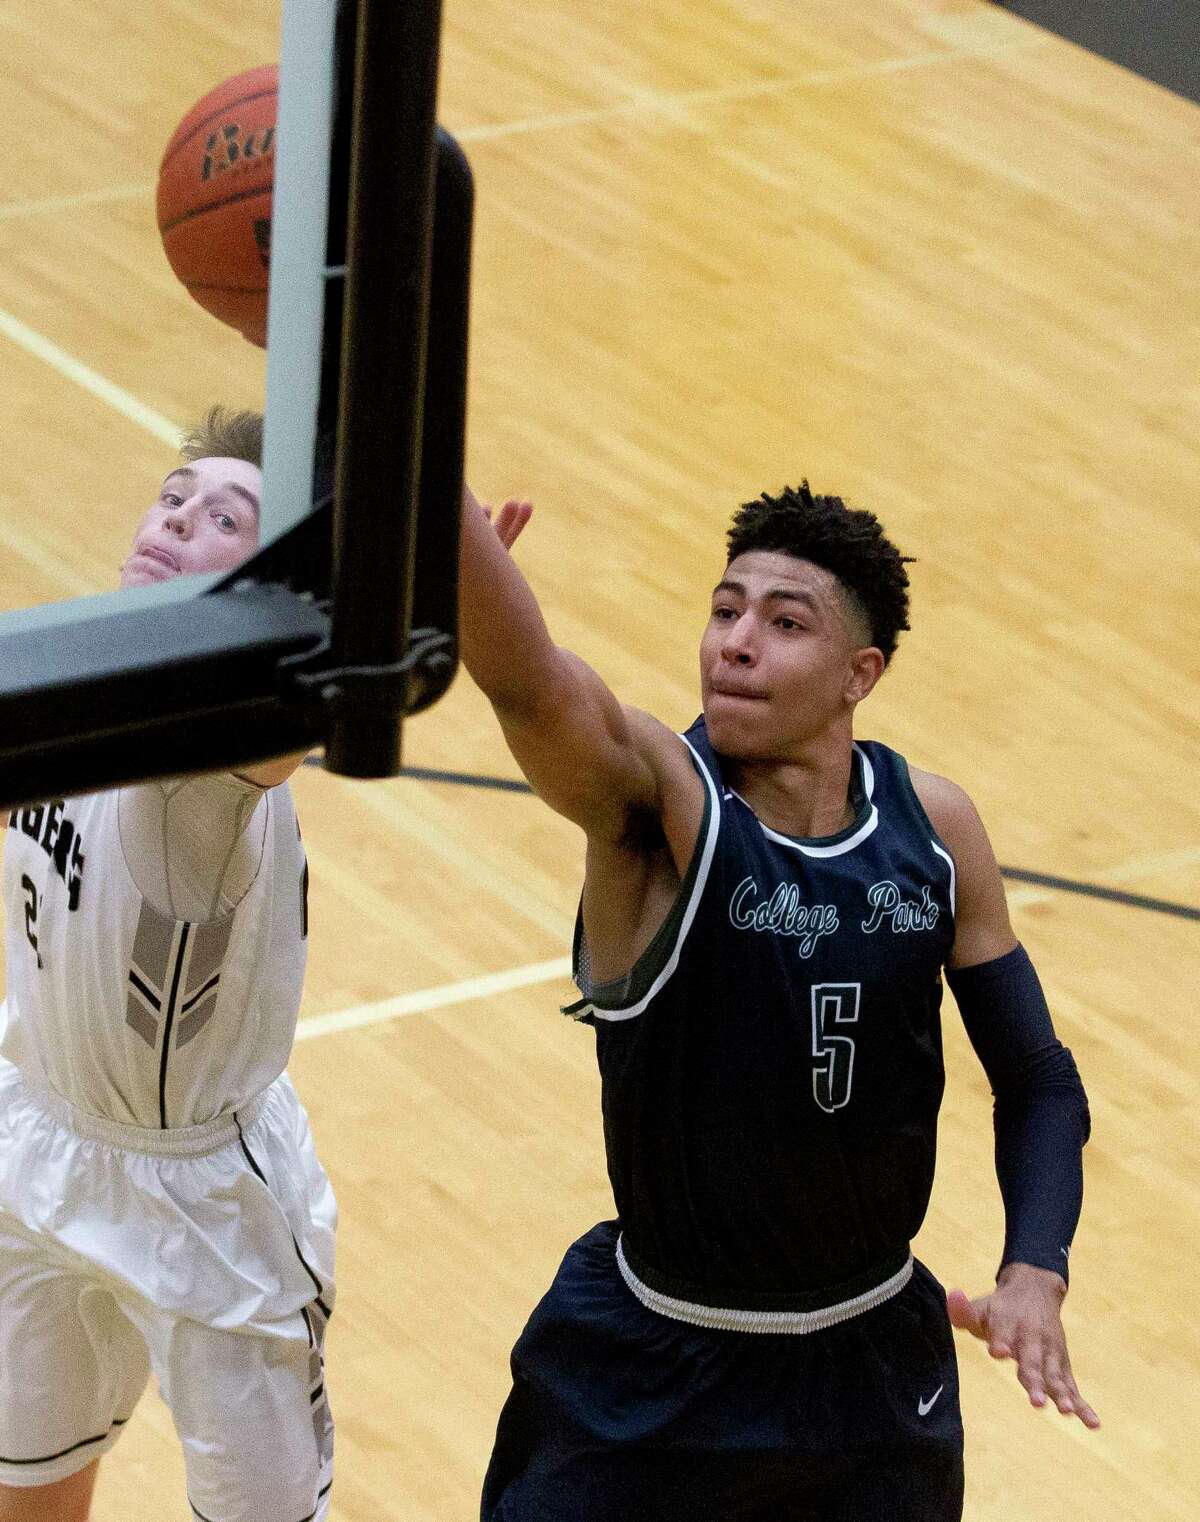 College Park guard Quentin Grimes (5) makes a shot off the backboard as Conroe guard Blaine Alger (22) defends during the fourth quarter of a District 12-6A high school boys basketball game at Conroe High School Friday, Jan. 27, 2017, in Conroe. Conroe defeated College Park 82-65.